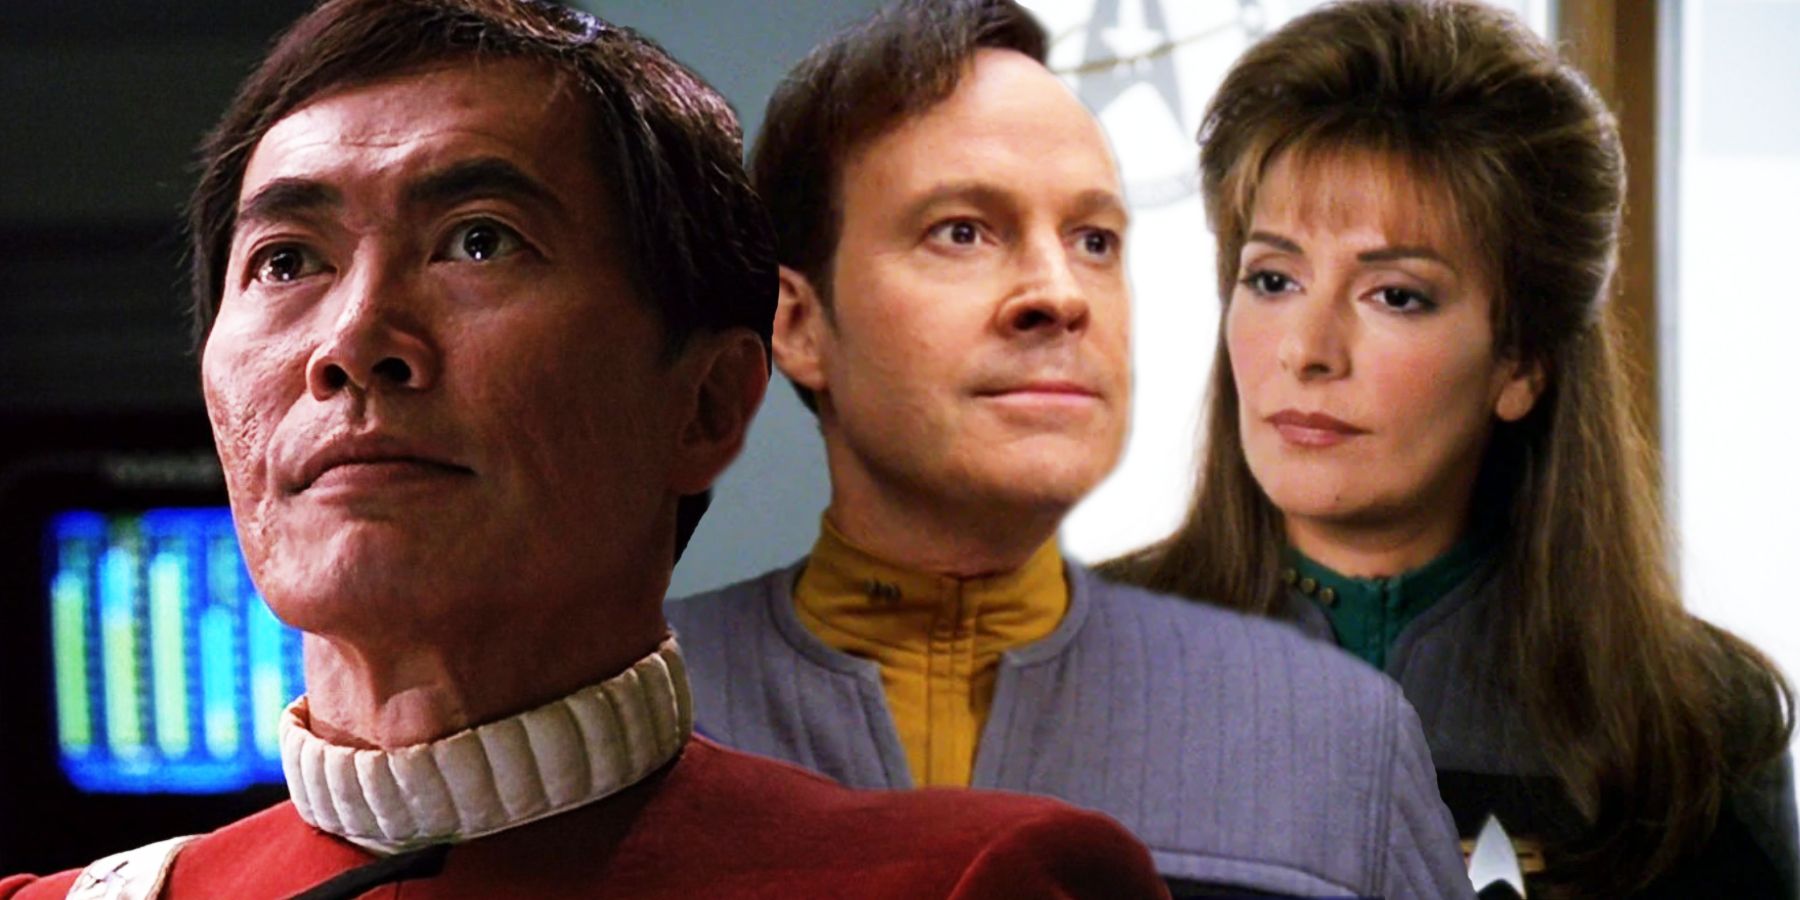 George Takei as Sulu, Dwight Schultz as Reg Barclay and Marina Sirtis as Troi in Star Trek: Voyager